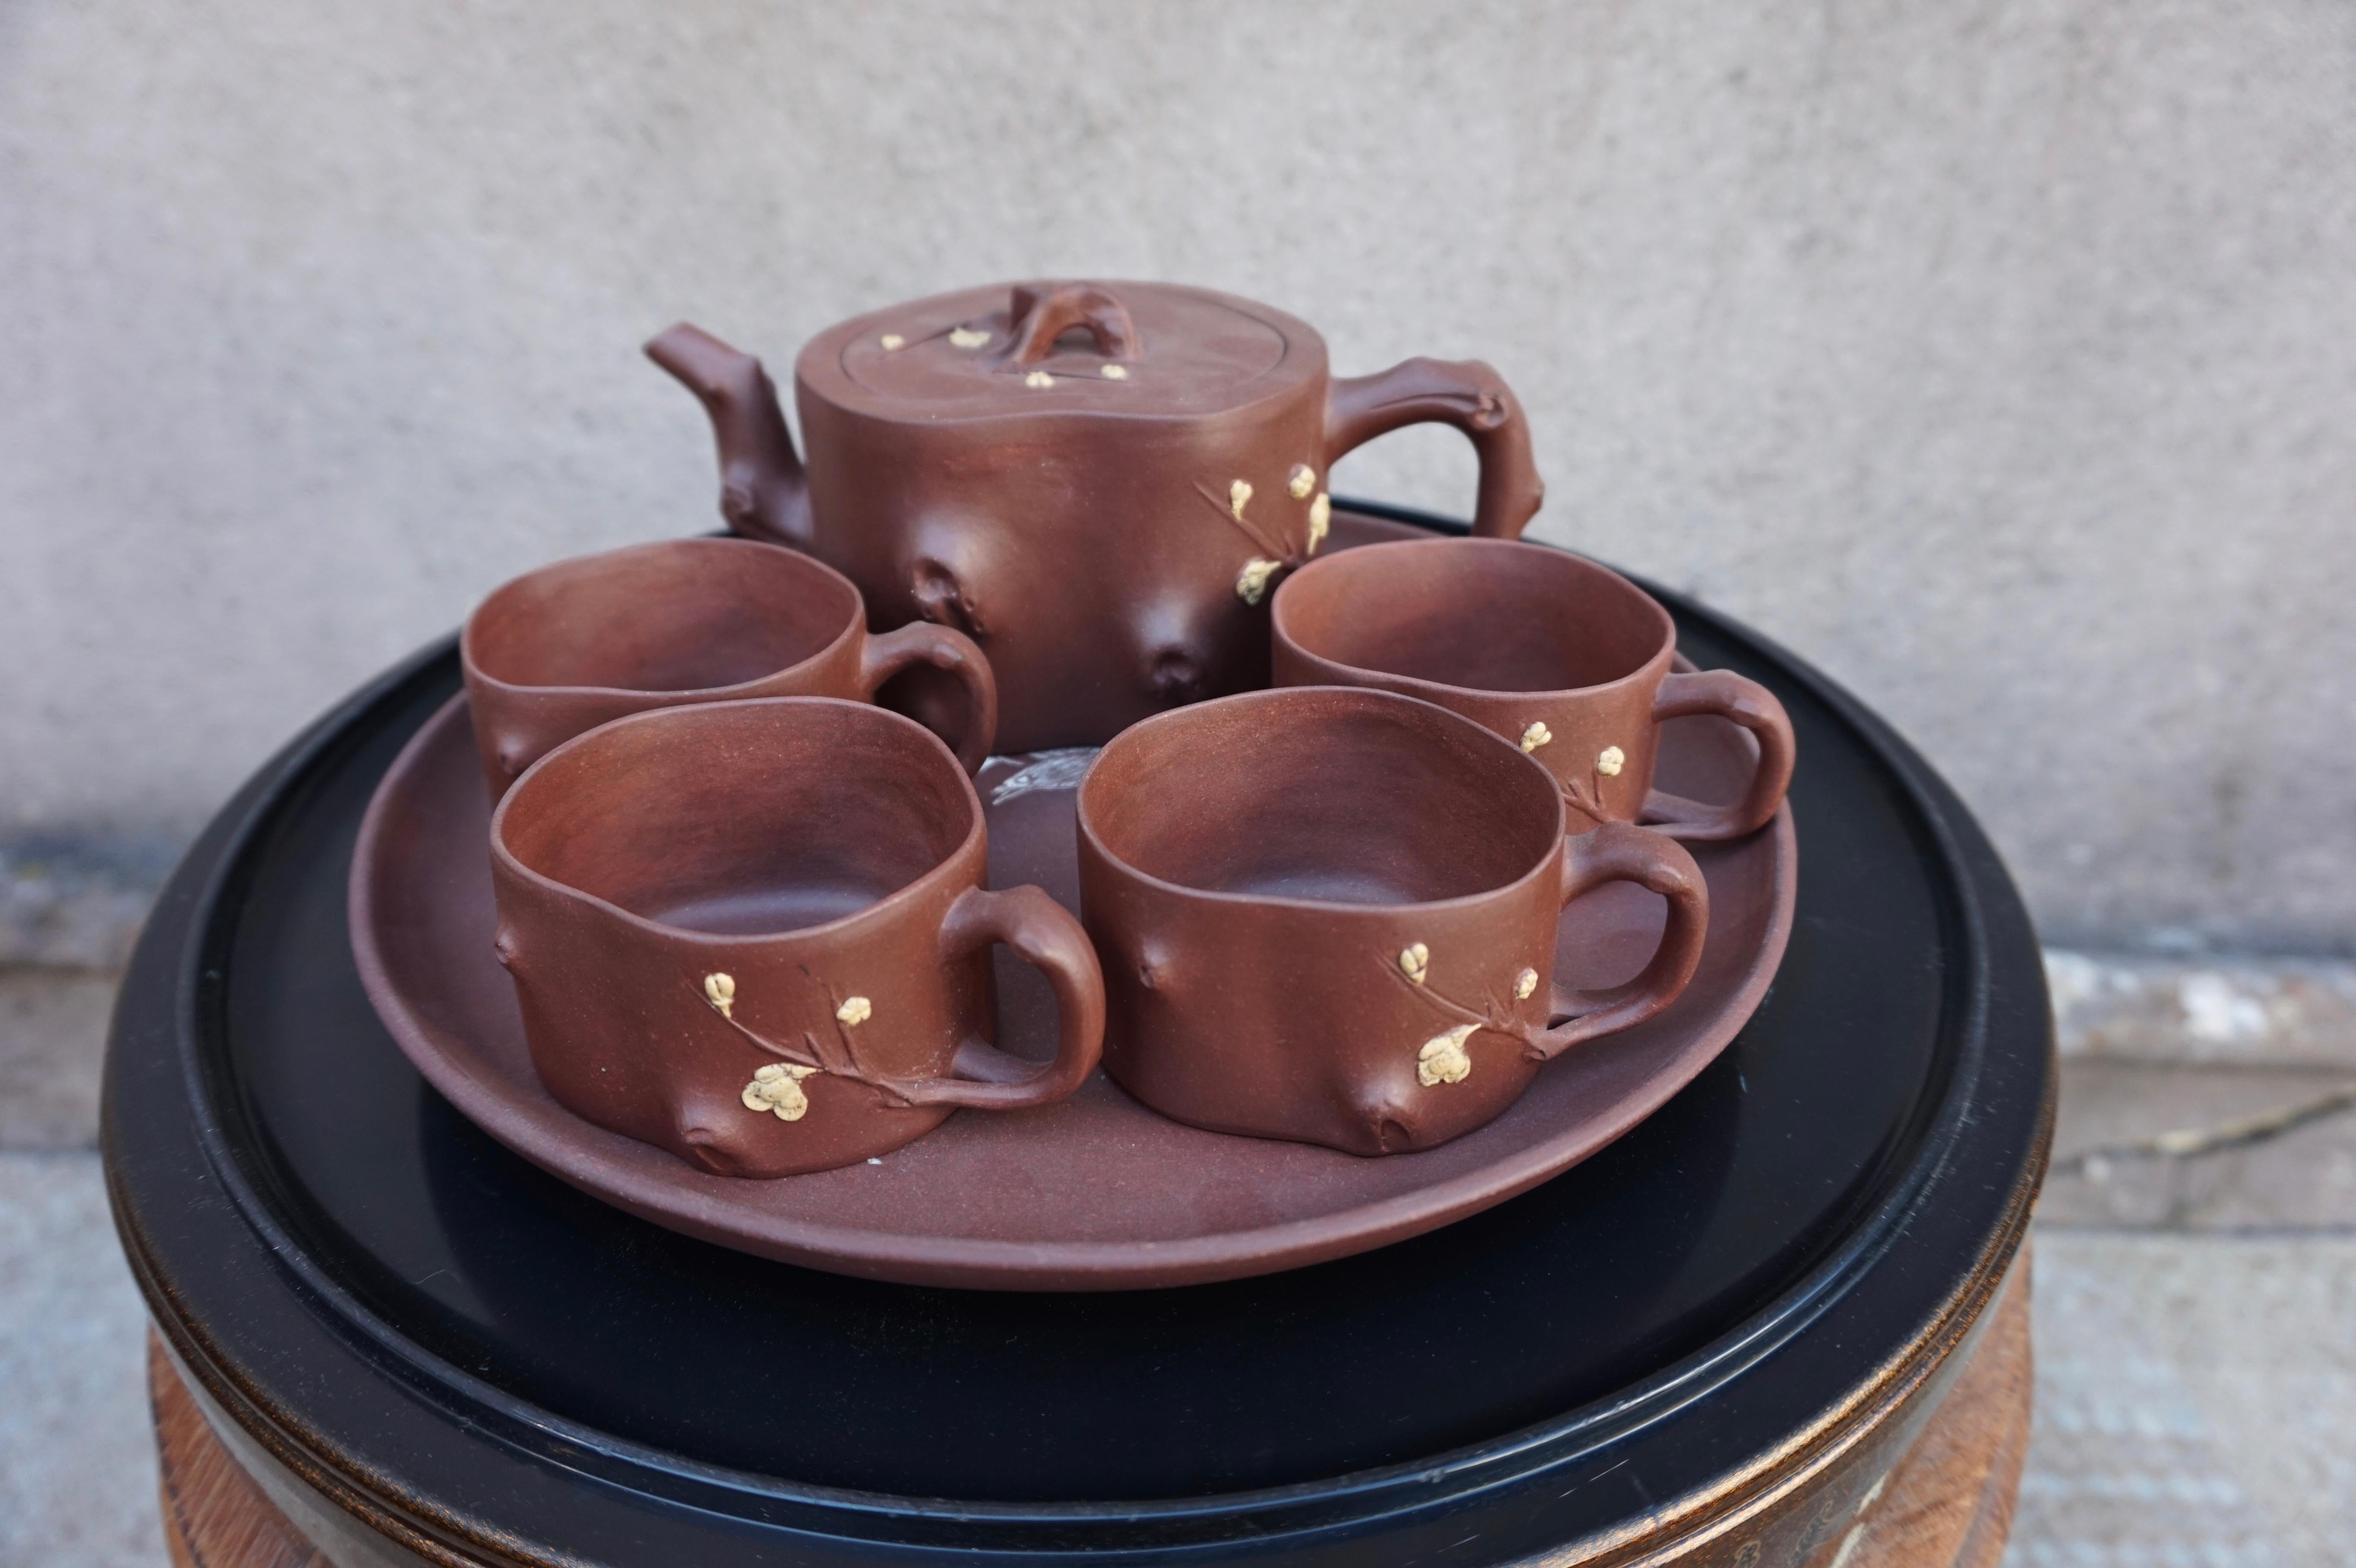 Daintily hand crafted Yixing wear tea set with beautiful shapes and blossom motif. The set comprises of four teacups and a single kettle and platter. The platter is not original to the set but comes with it. The kettle is stamped at the base. Yixing